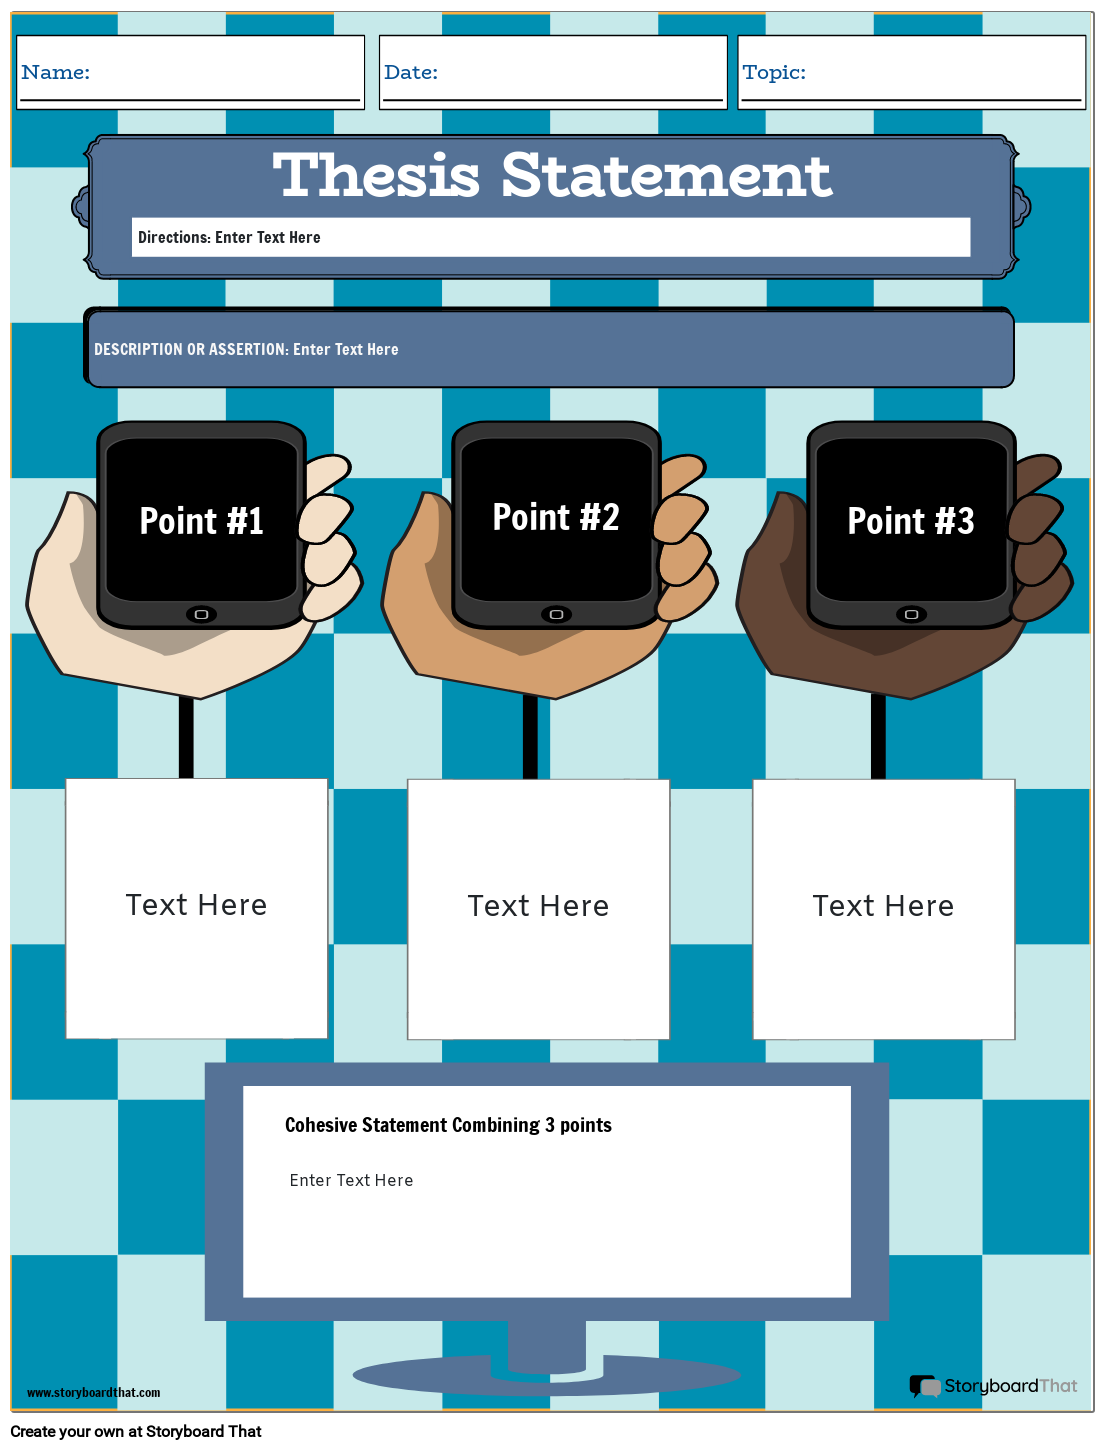 Writing Thesis Statement Guide